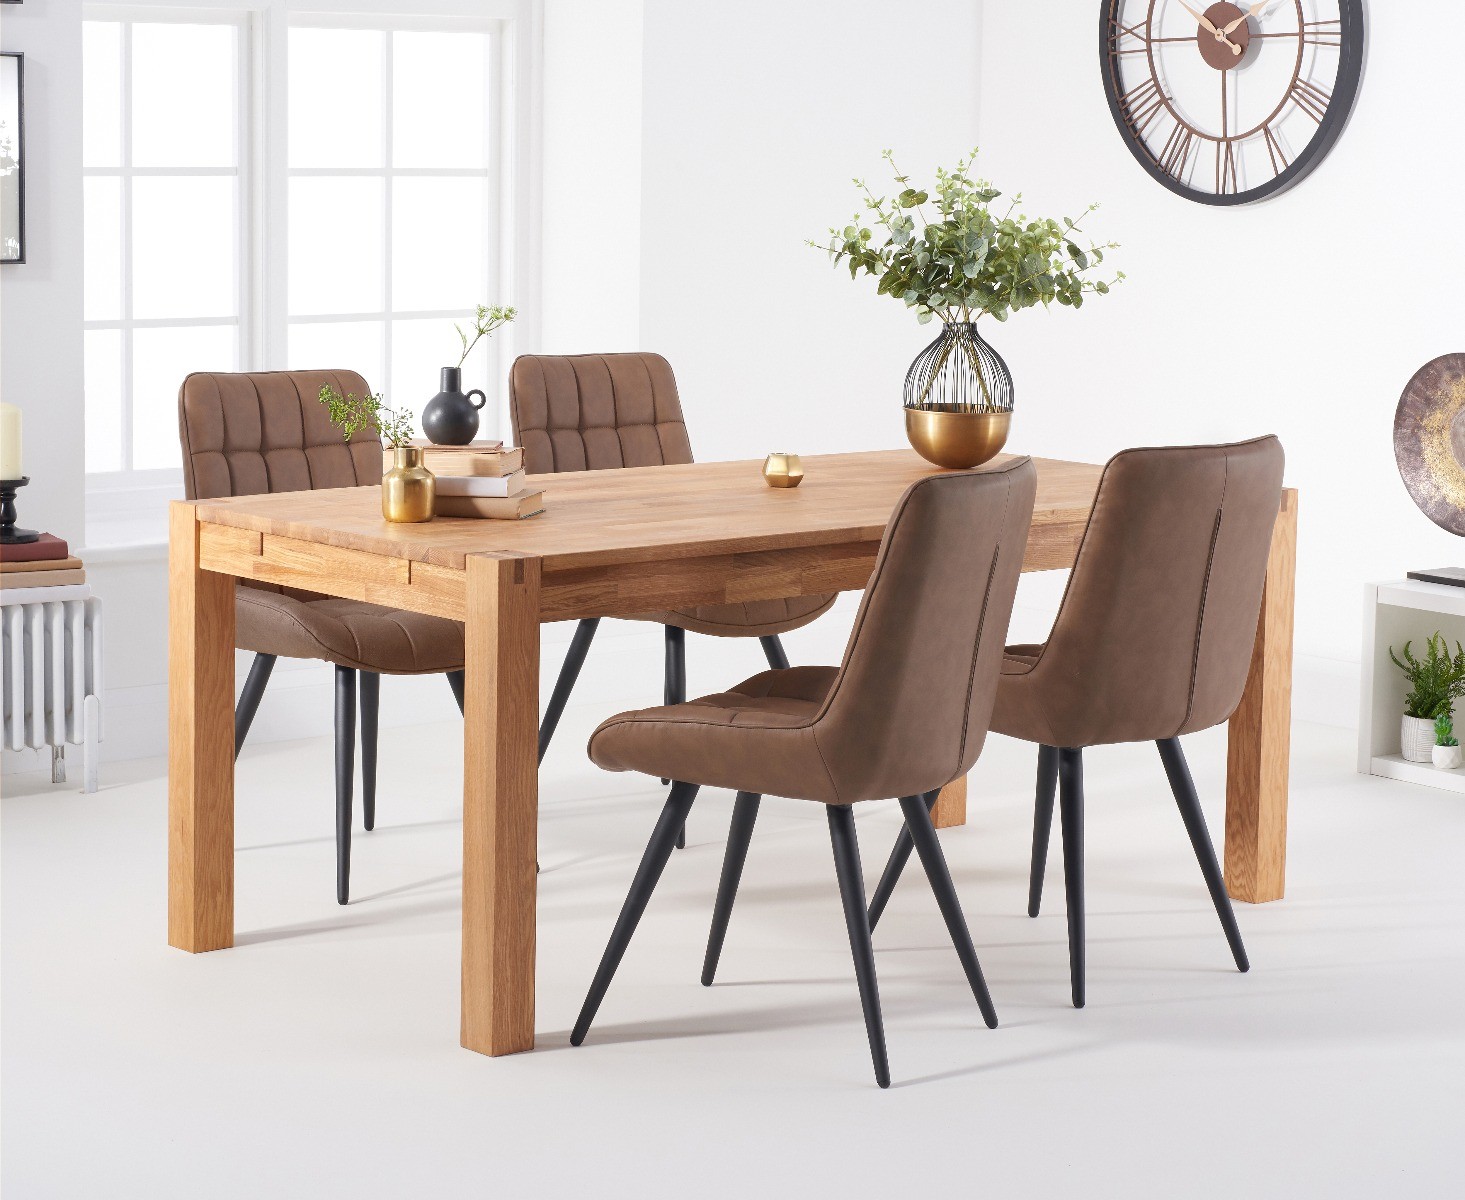 Thetford 180cm Oak Dining Table With 8 Grey Larson Chairs